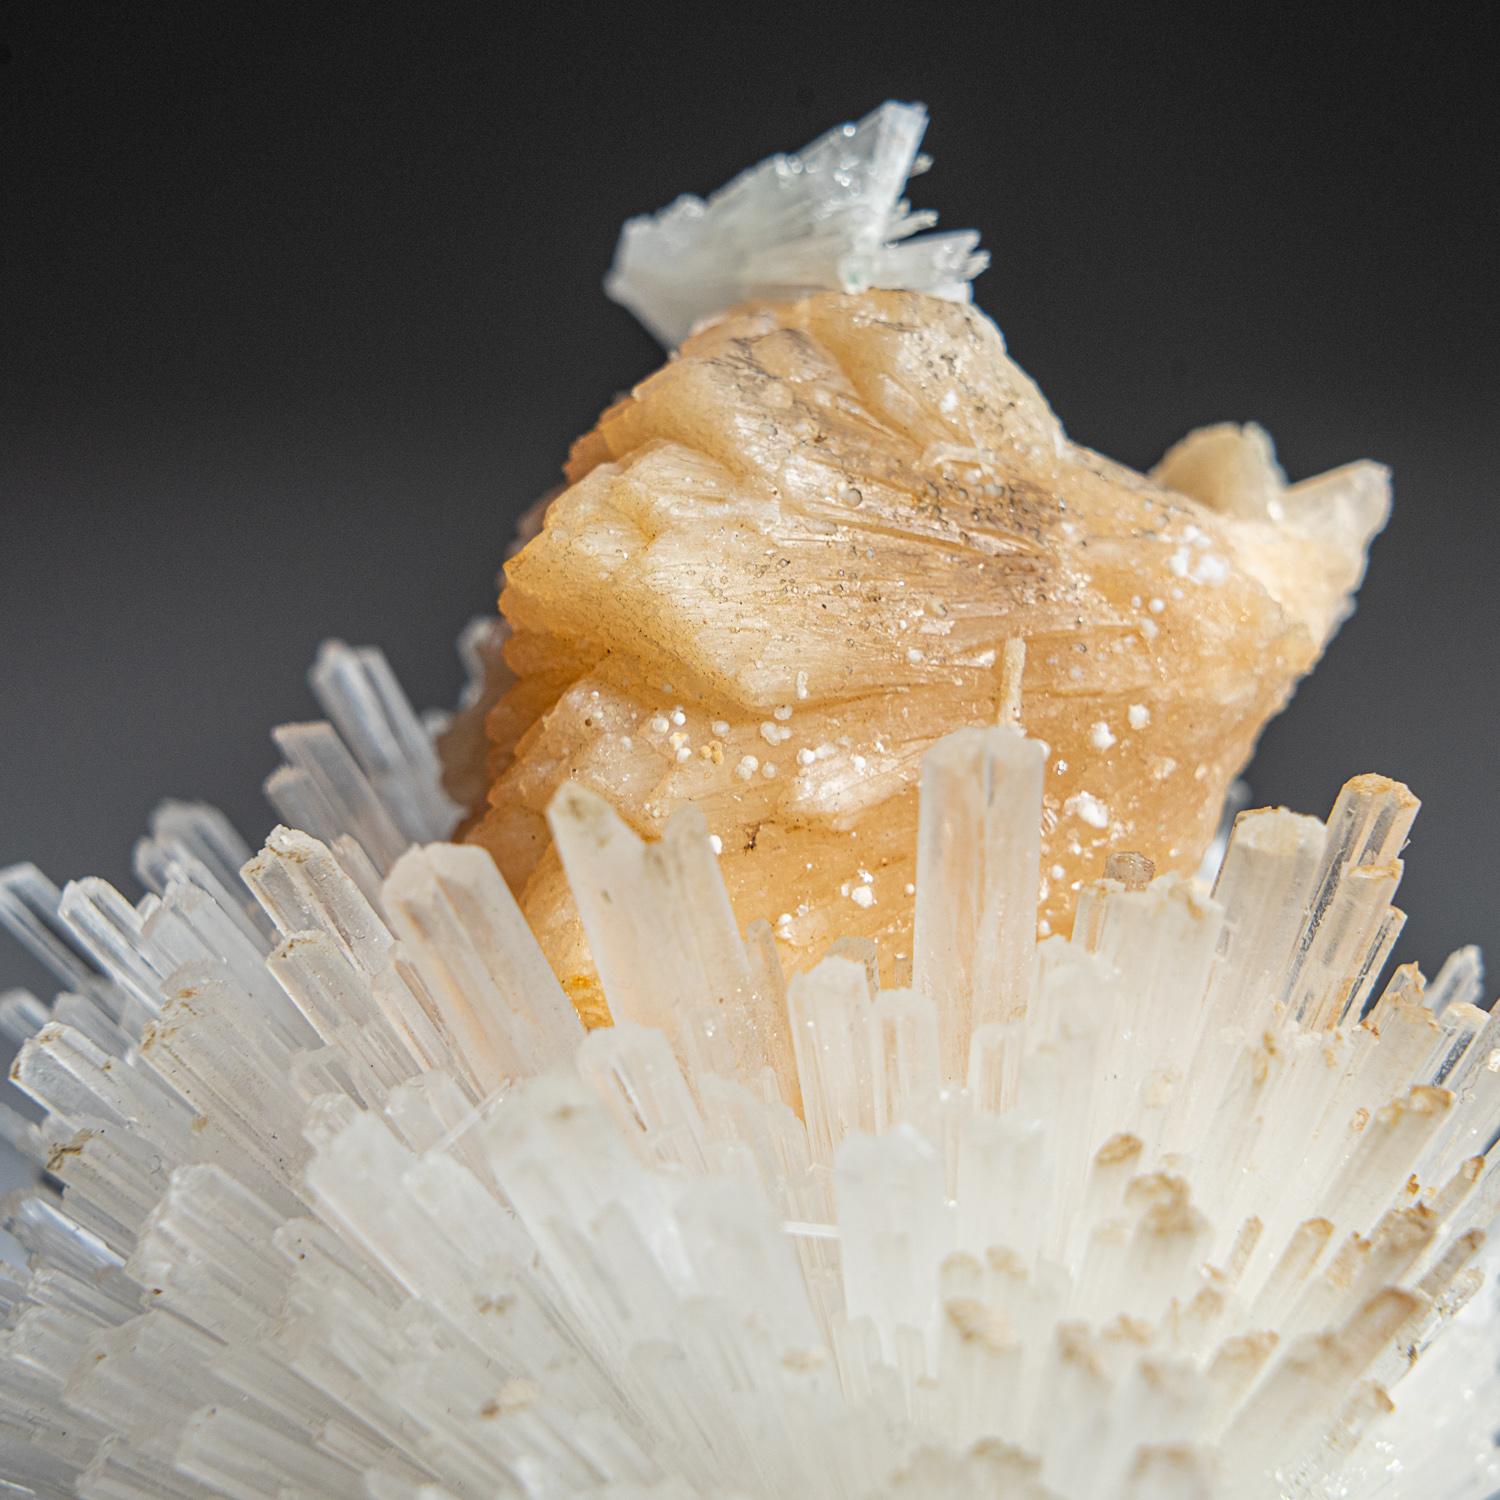 From Nasik District, Maharashtra, India Large lustrous cluster of an acicular sprays of scolectite crystals on pink stilbite. The scolecite crystals have glassy crystal faces and are mostly translucent to transparent at the terminations. This rare